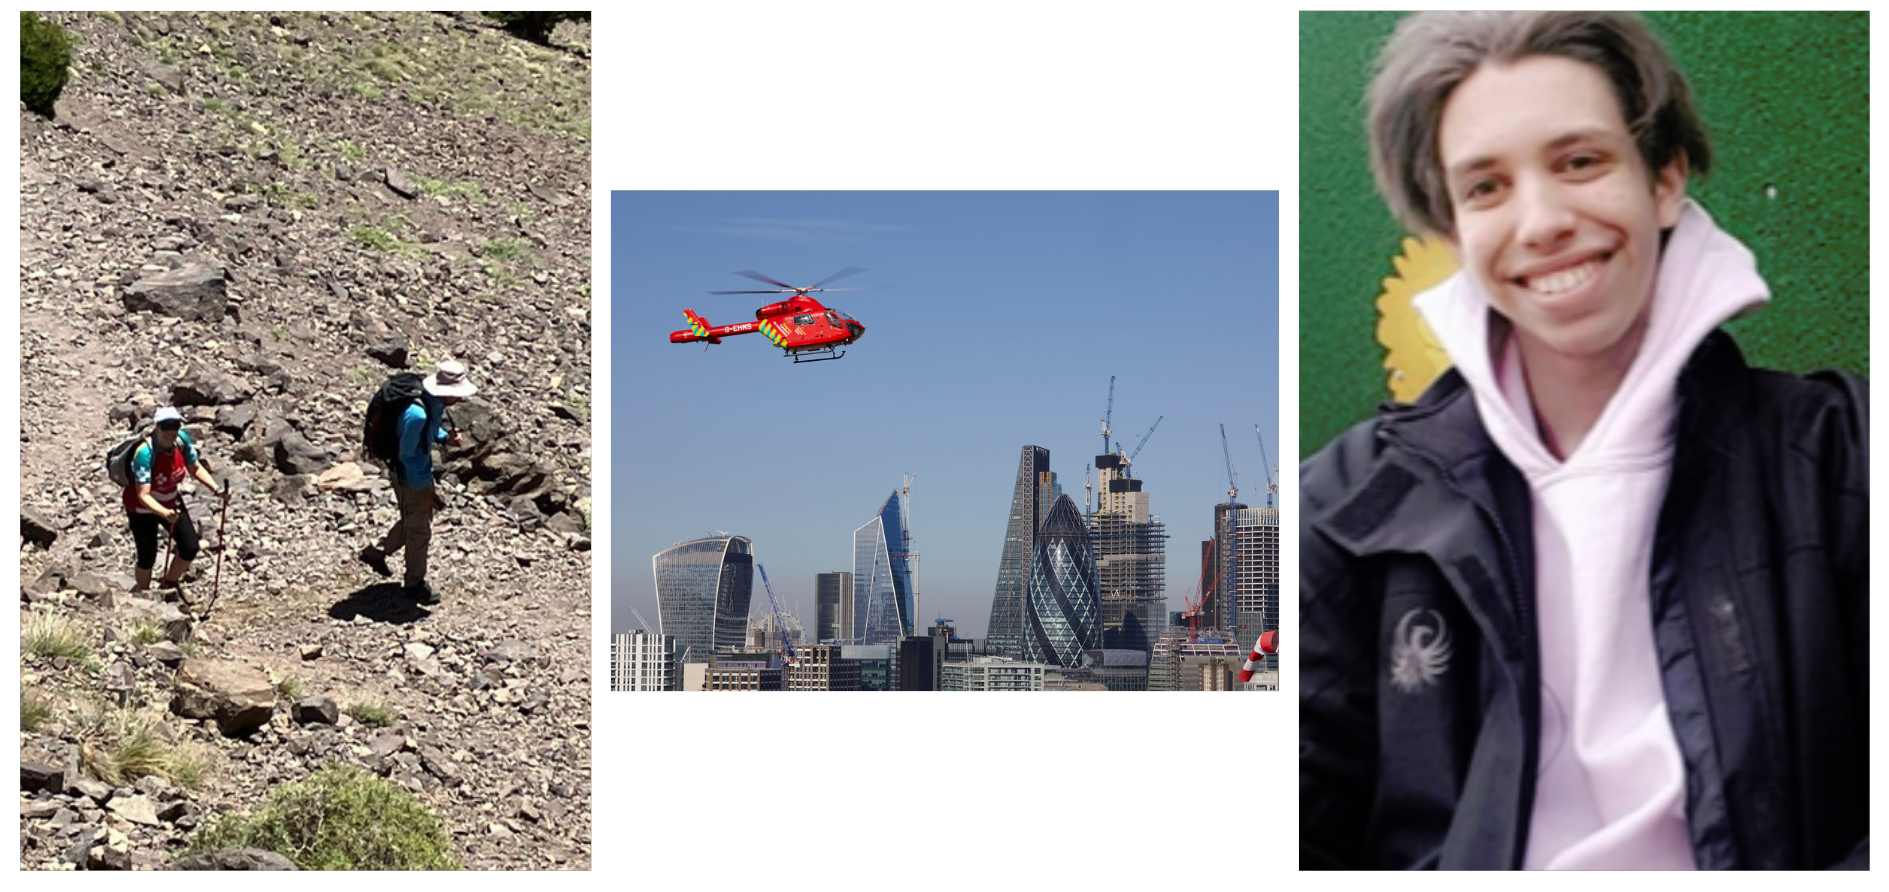 Two people hiking, London's Air Ambulance helicopter in flight, a picture of David.